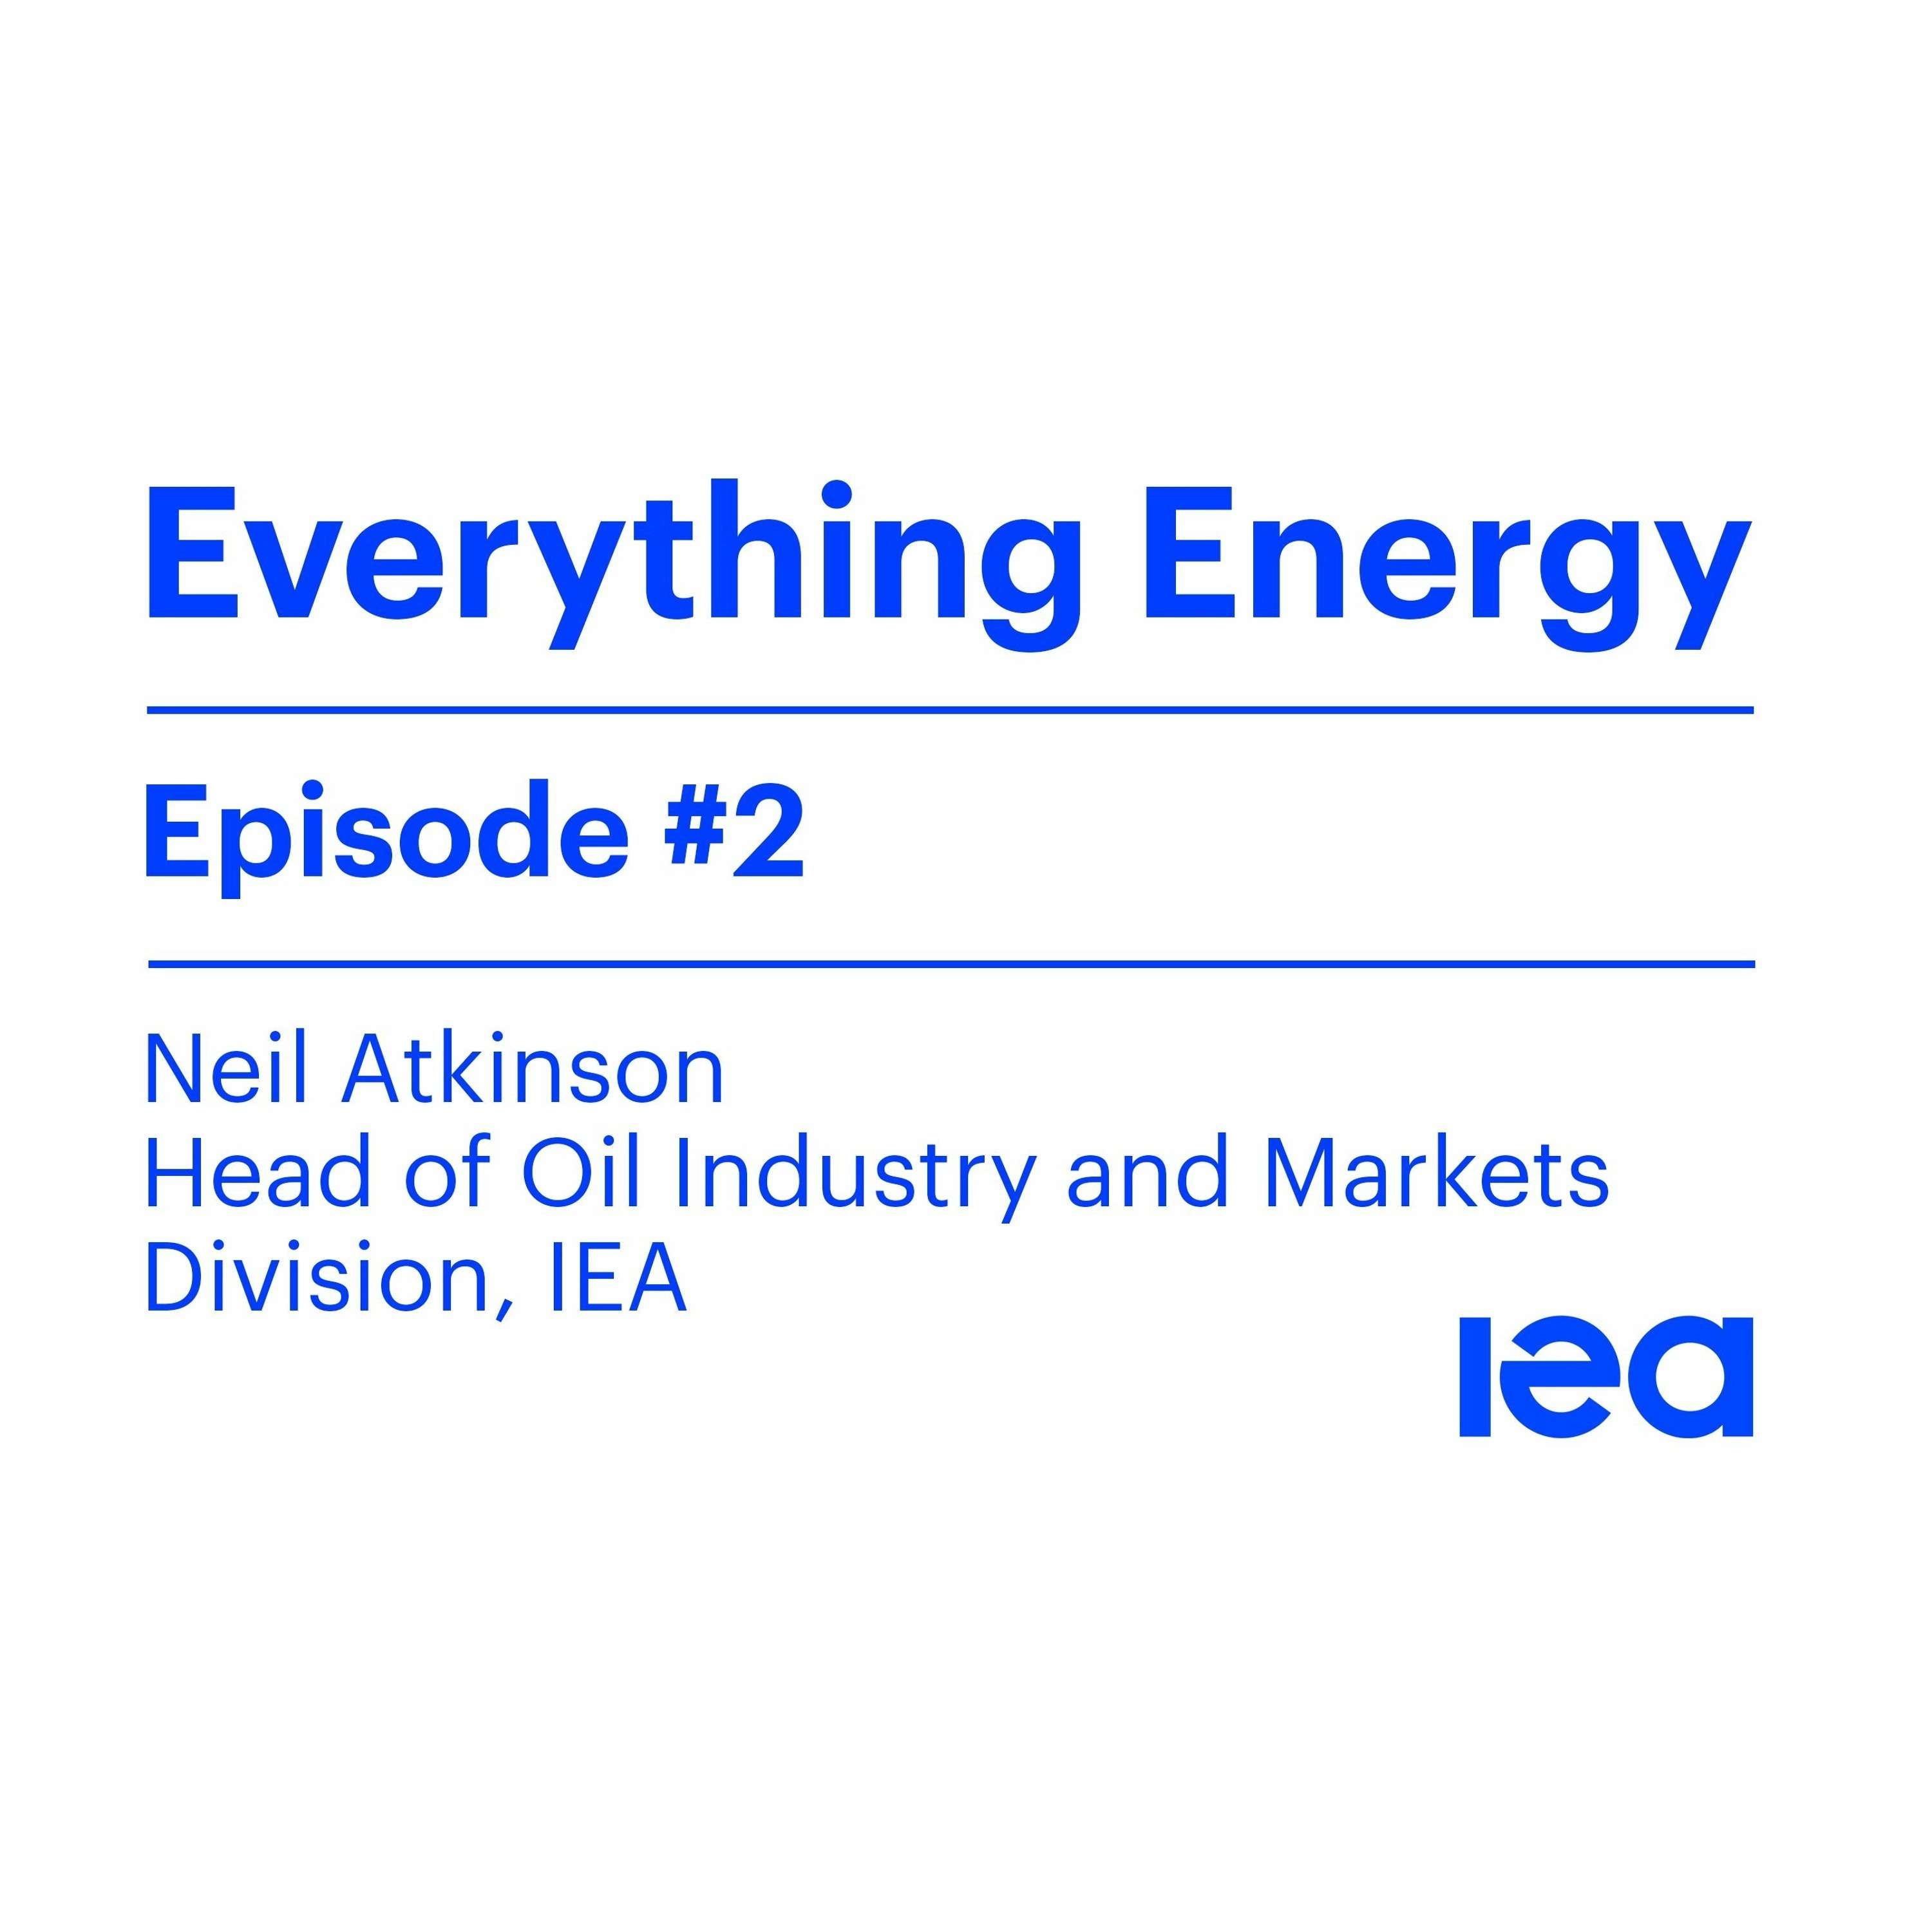 Episode 2: Black April, oil markets and the Covid-19 pandemic